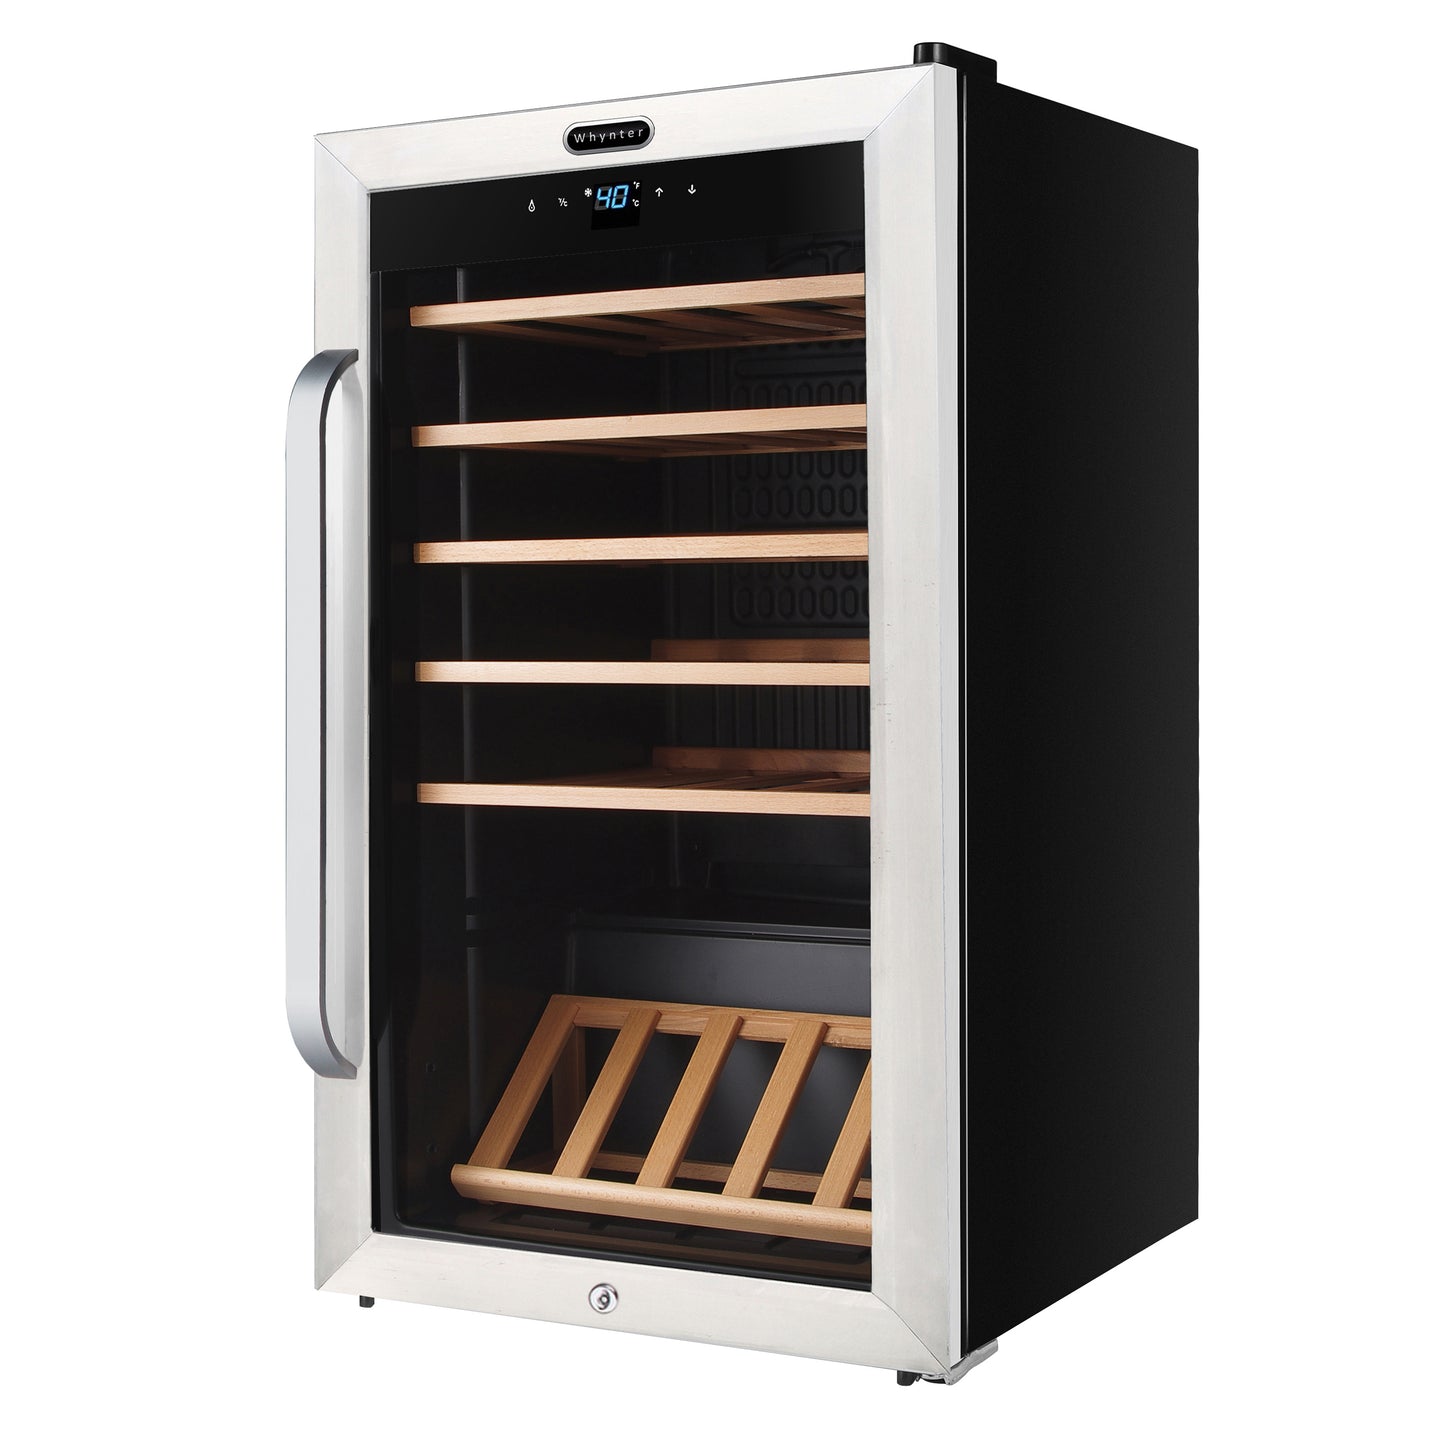 A black and silver wine cooler with adjustable wooden shelves, capable of holding up to 166 standard 750ml wine bottles.